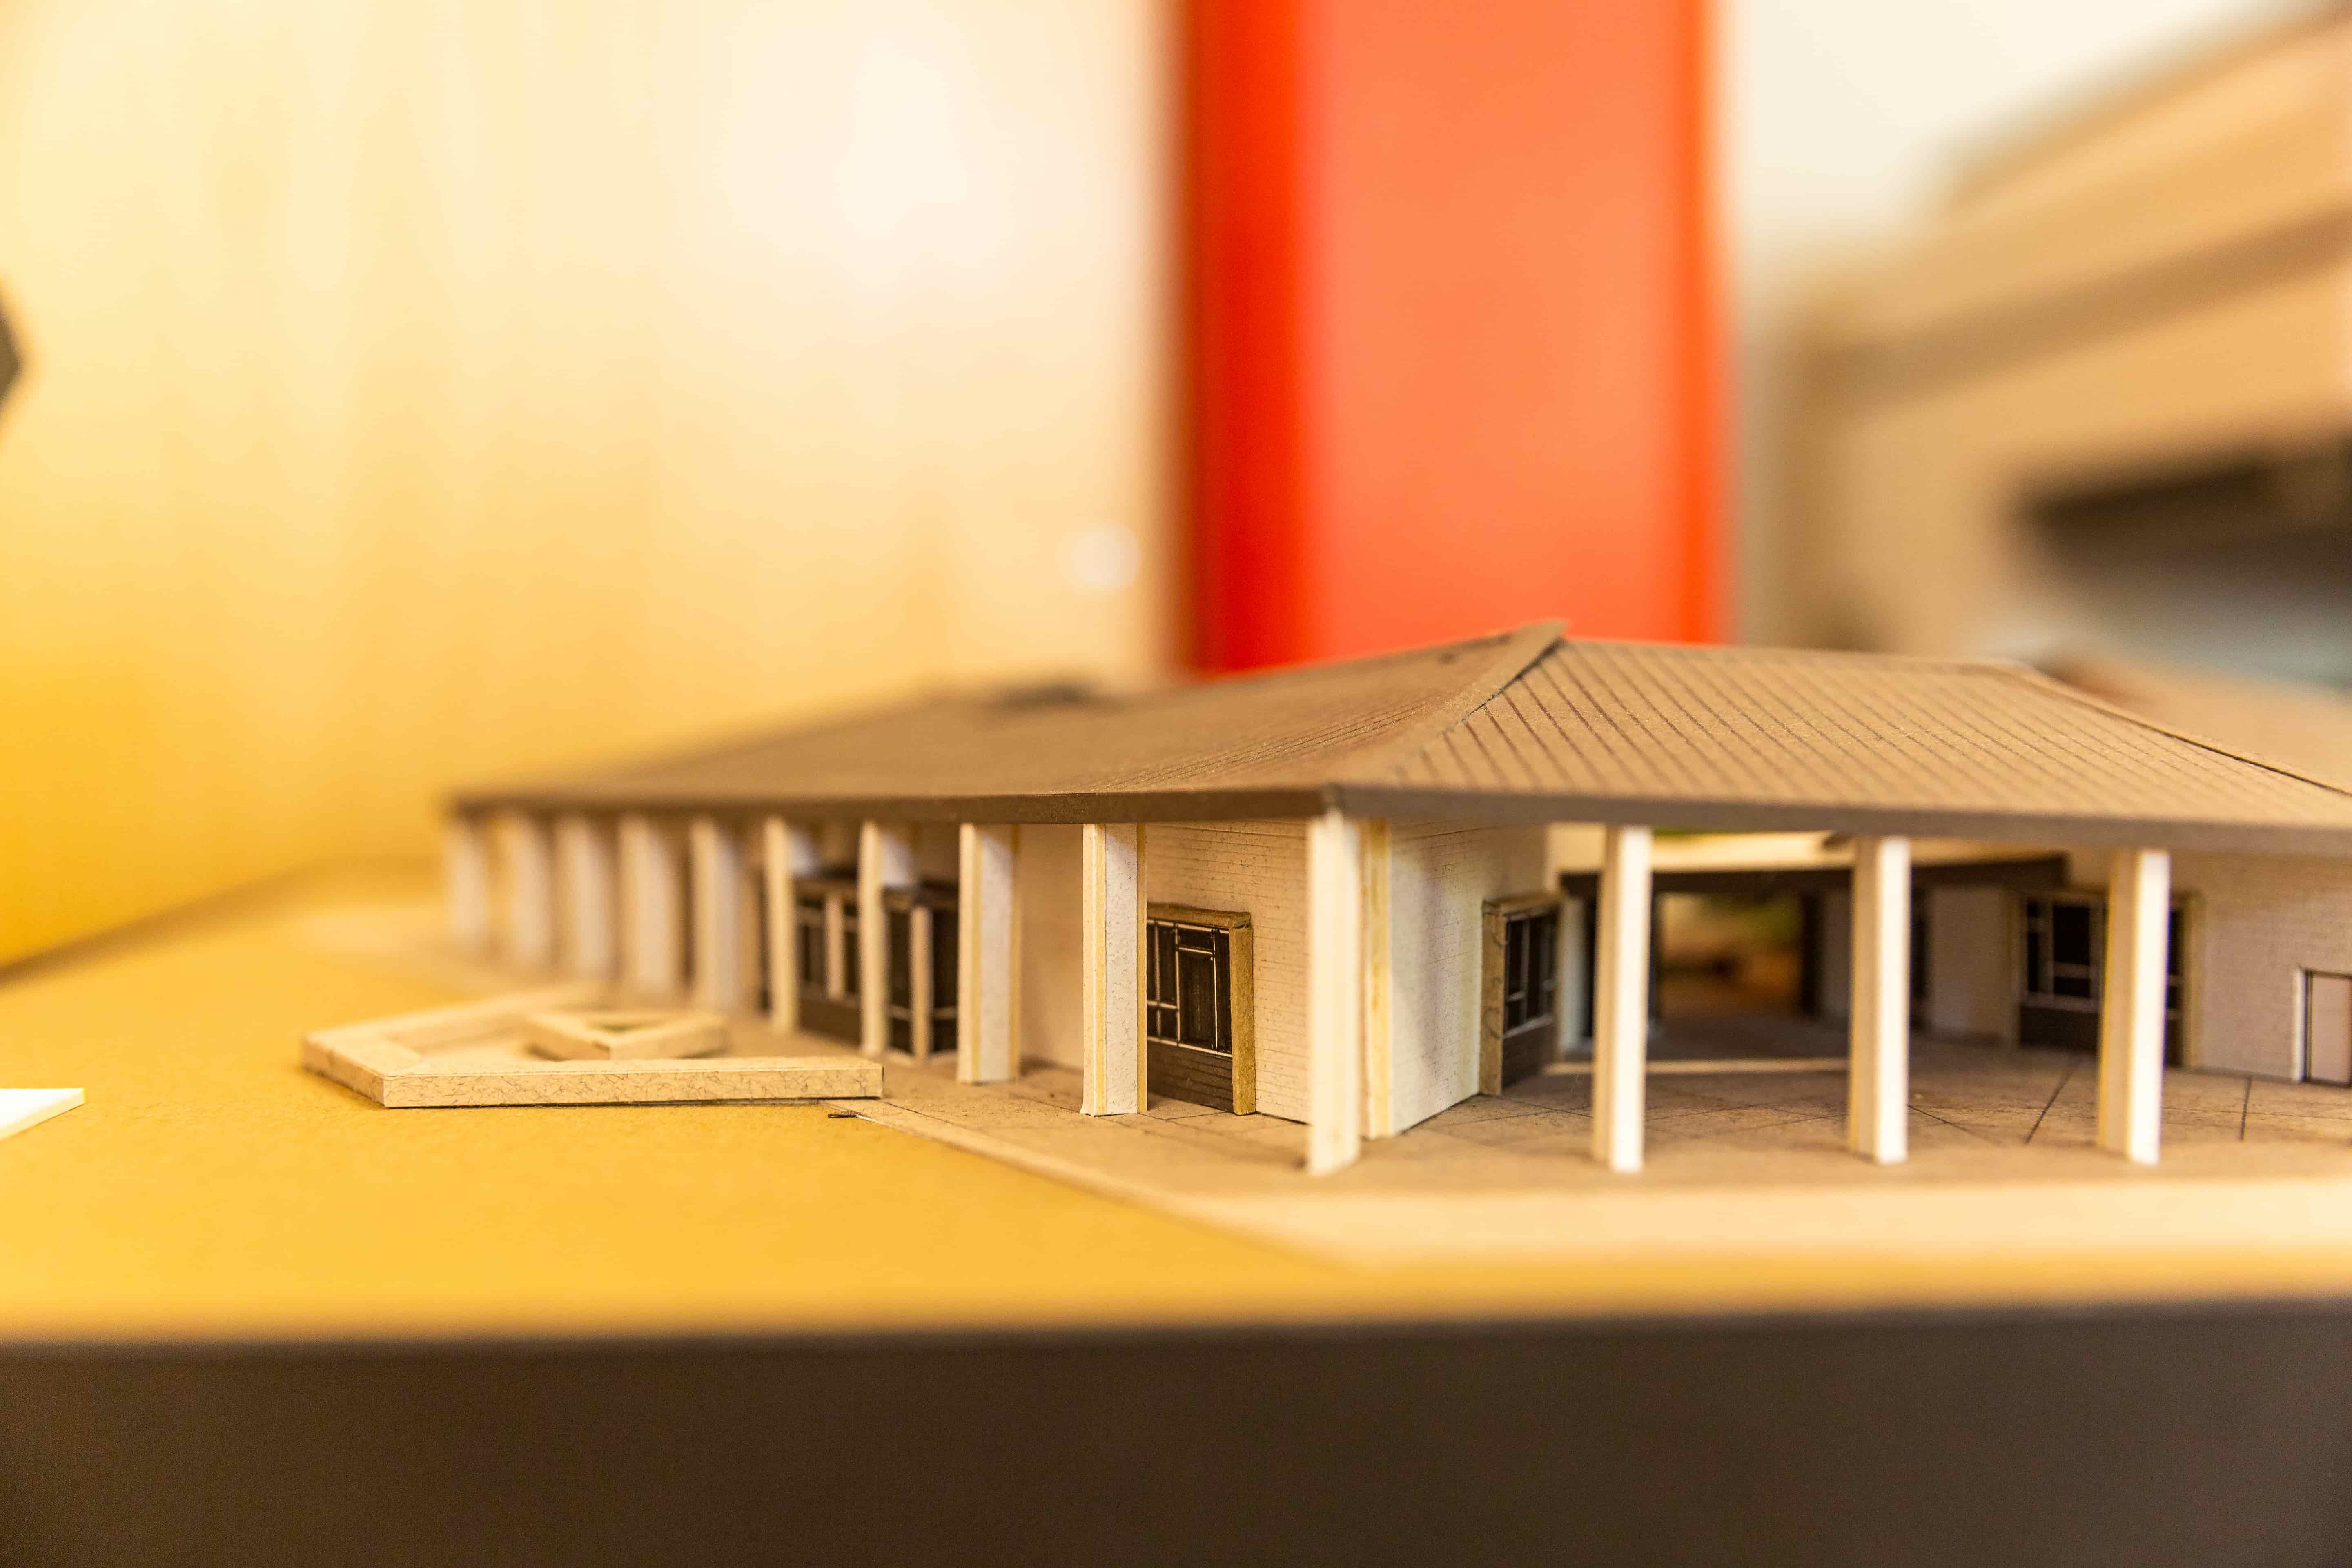 An architectural model of the Madera Community College Oakhurst Campus